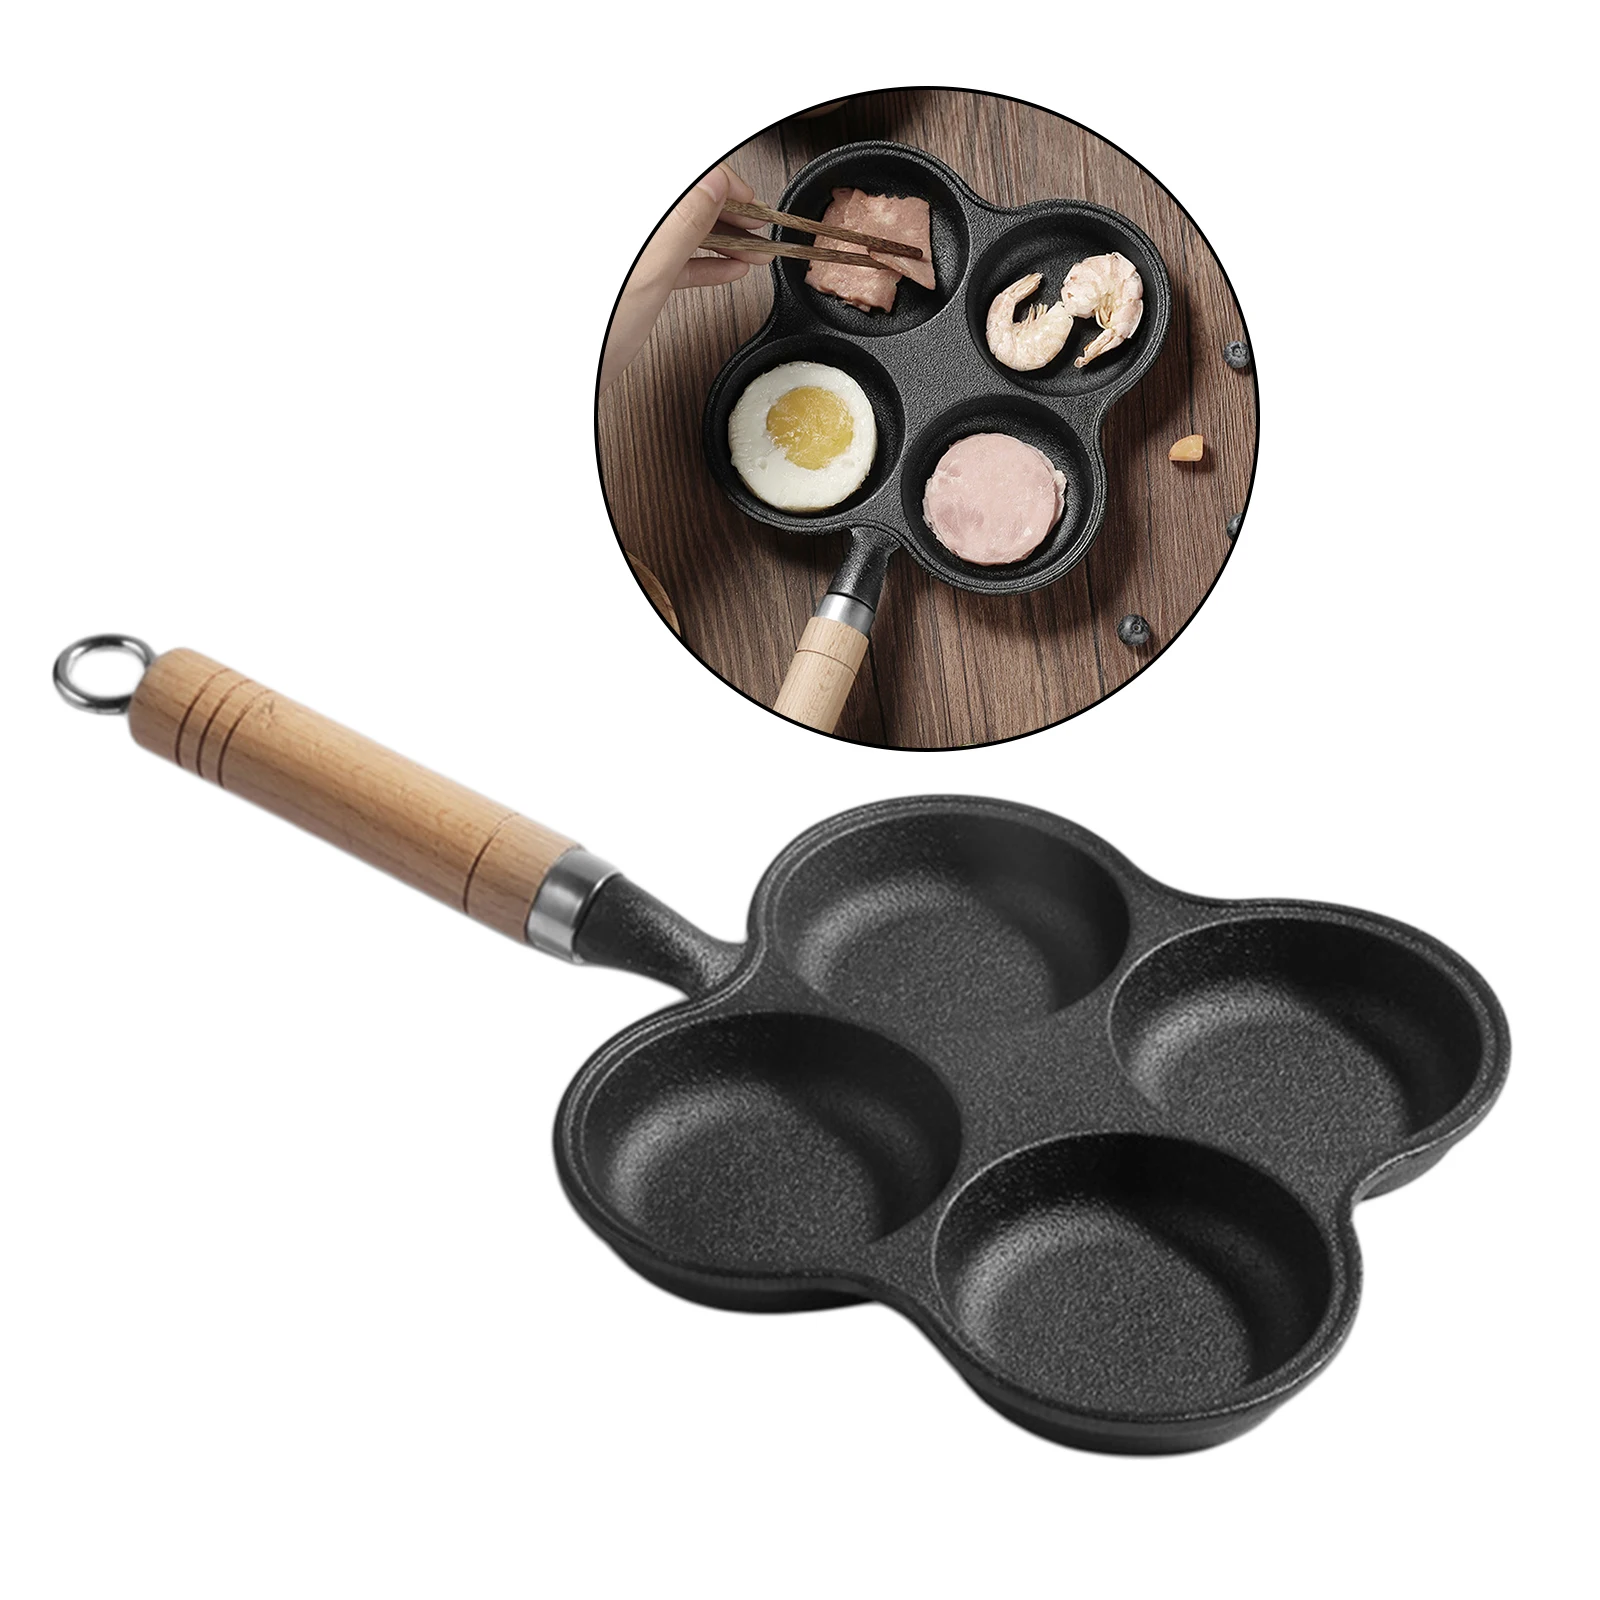 Compact 4-Cup Egg Frying Pan, Non Stick Egg Cooker Pan, Cast Iron Omelette Pancake Pans, 36x11cm Breakfast Cooking Omelet Burger